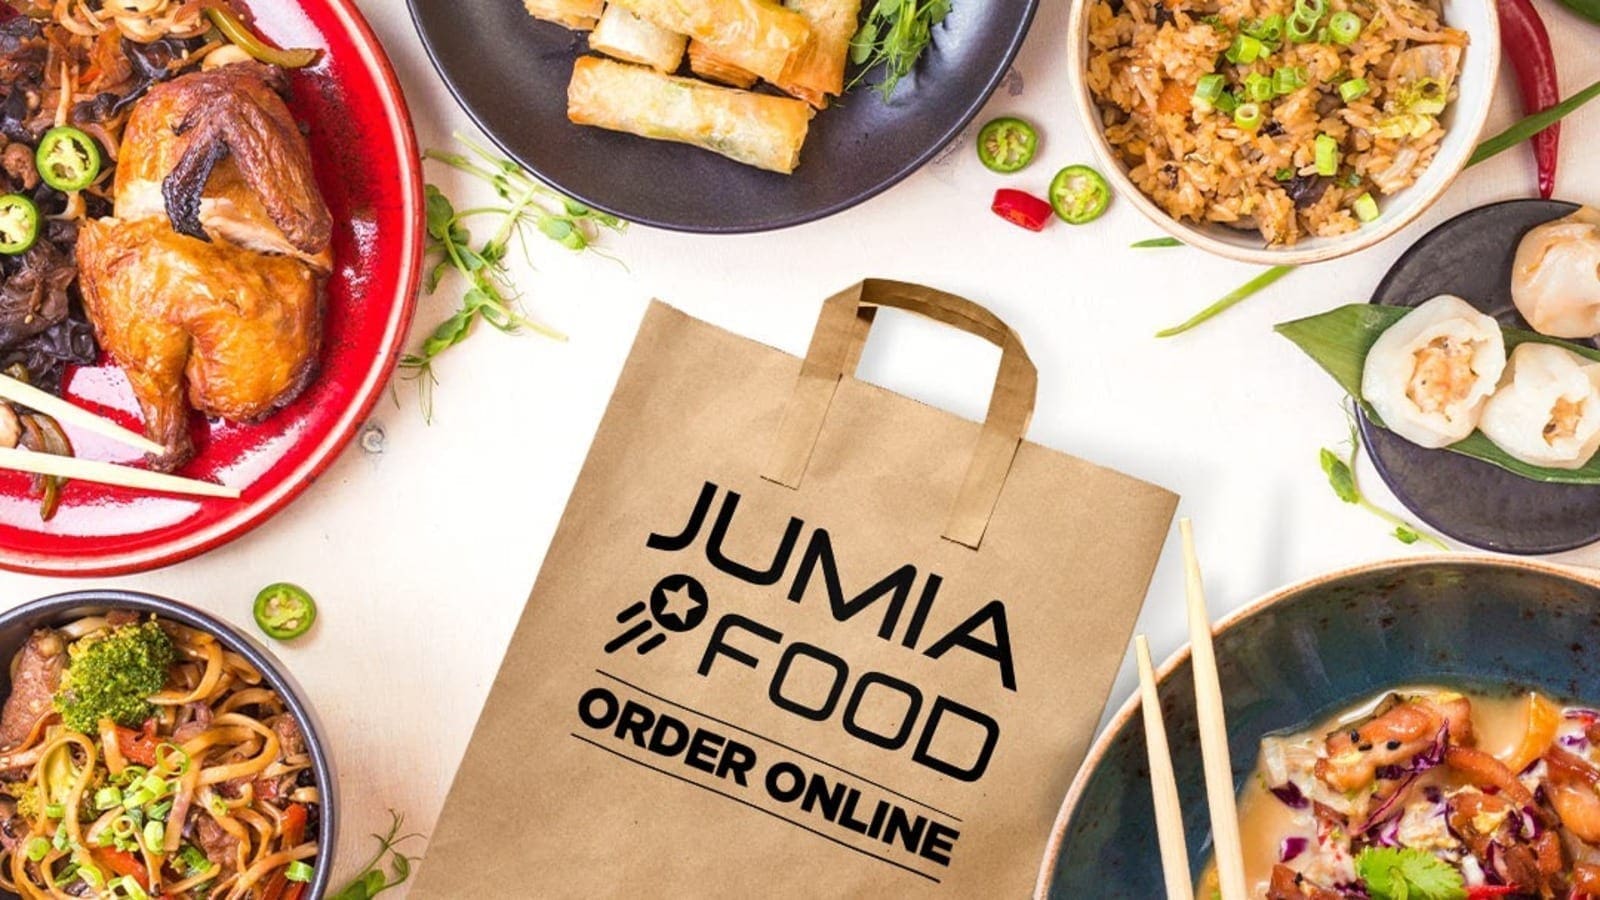 Airline caterer NAS Servair partners with Jumia to offer food delivery services